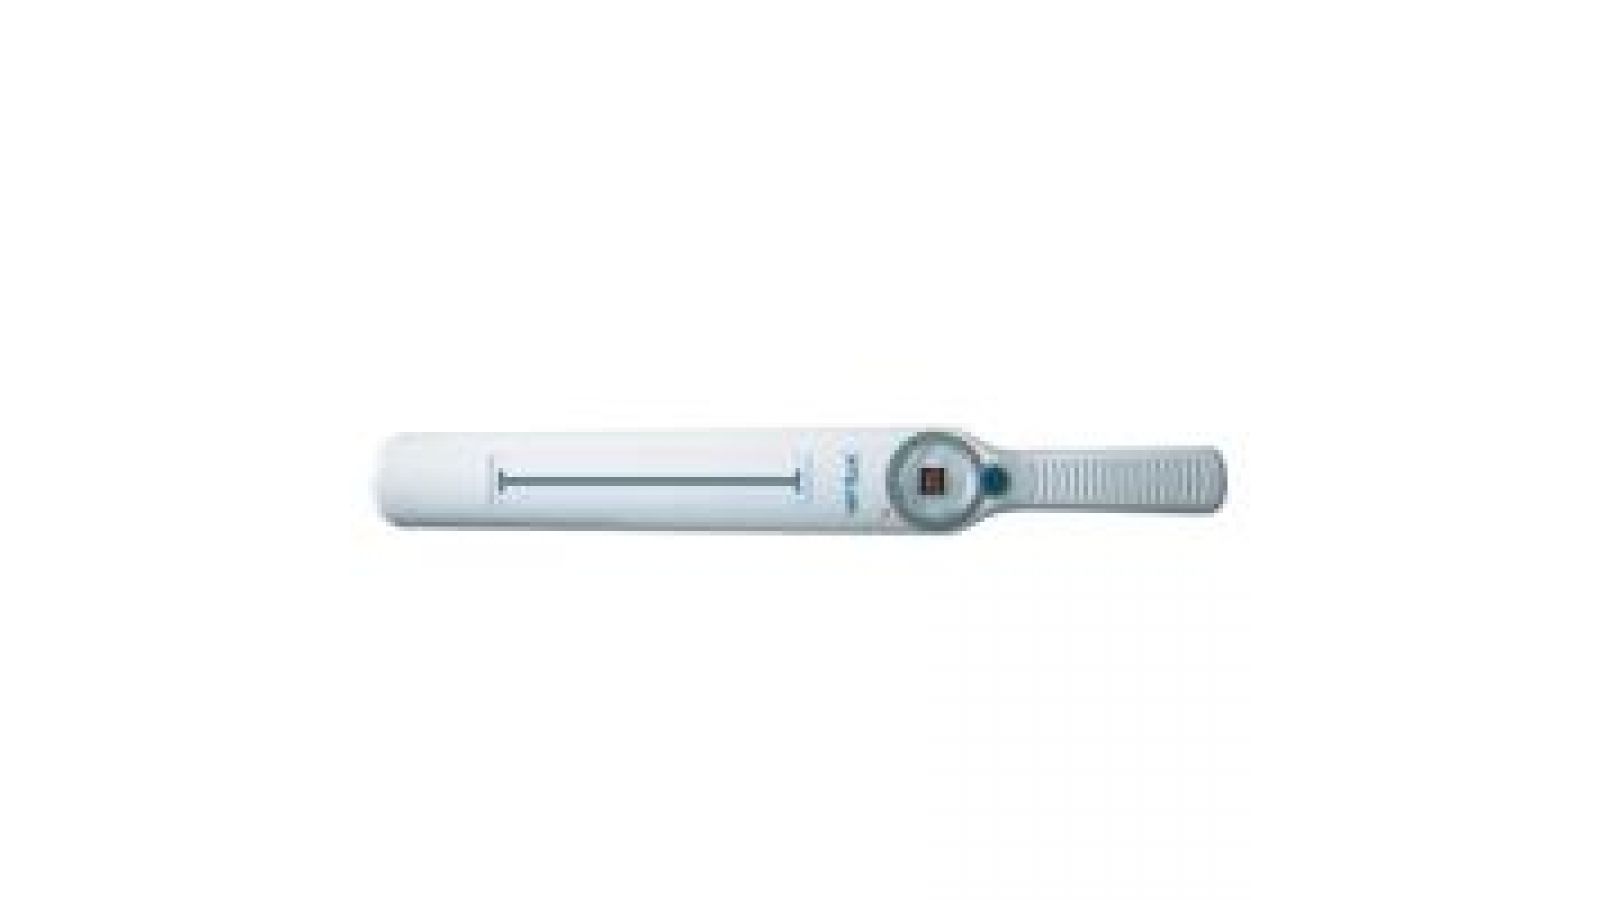 CleanWave Sanitizing Wand